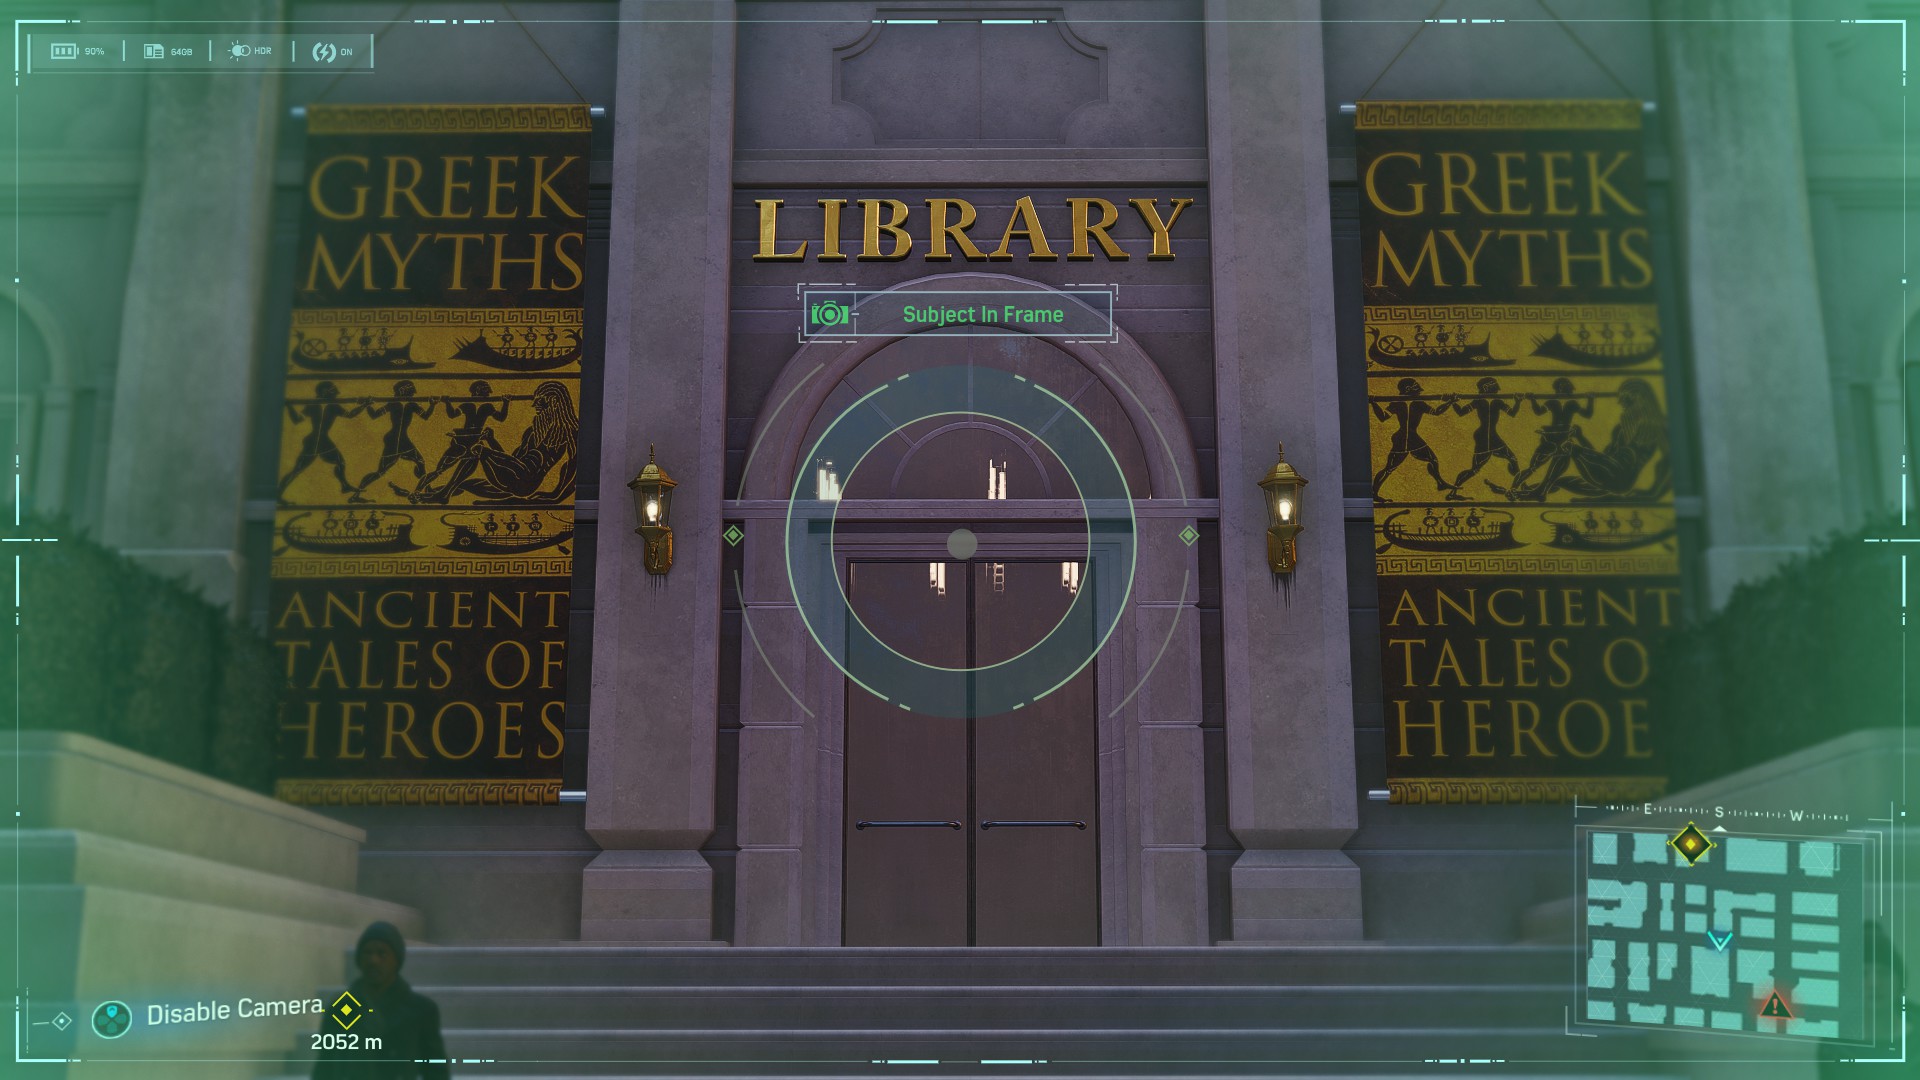 Spider-Man Secret Photo Op of a library